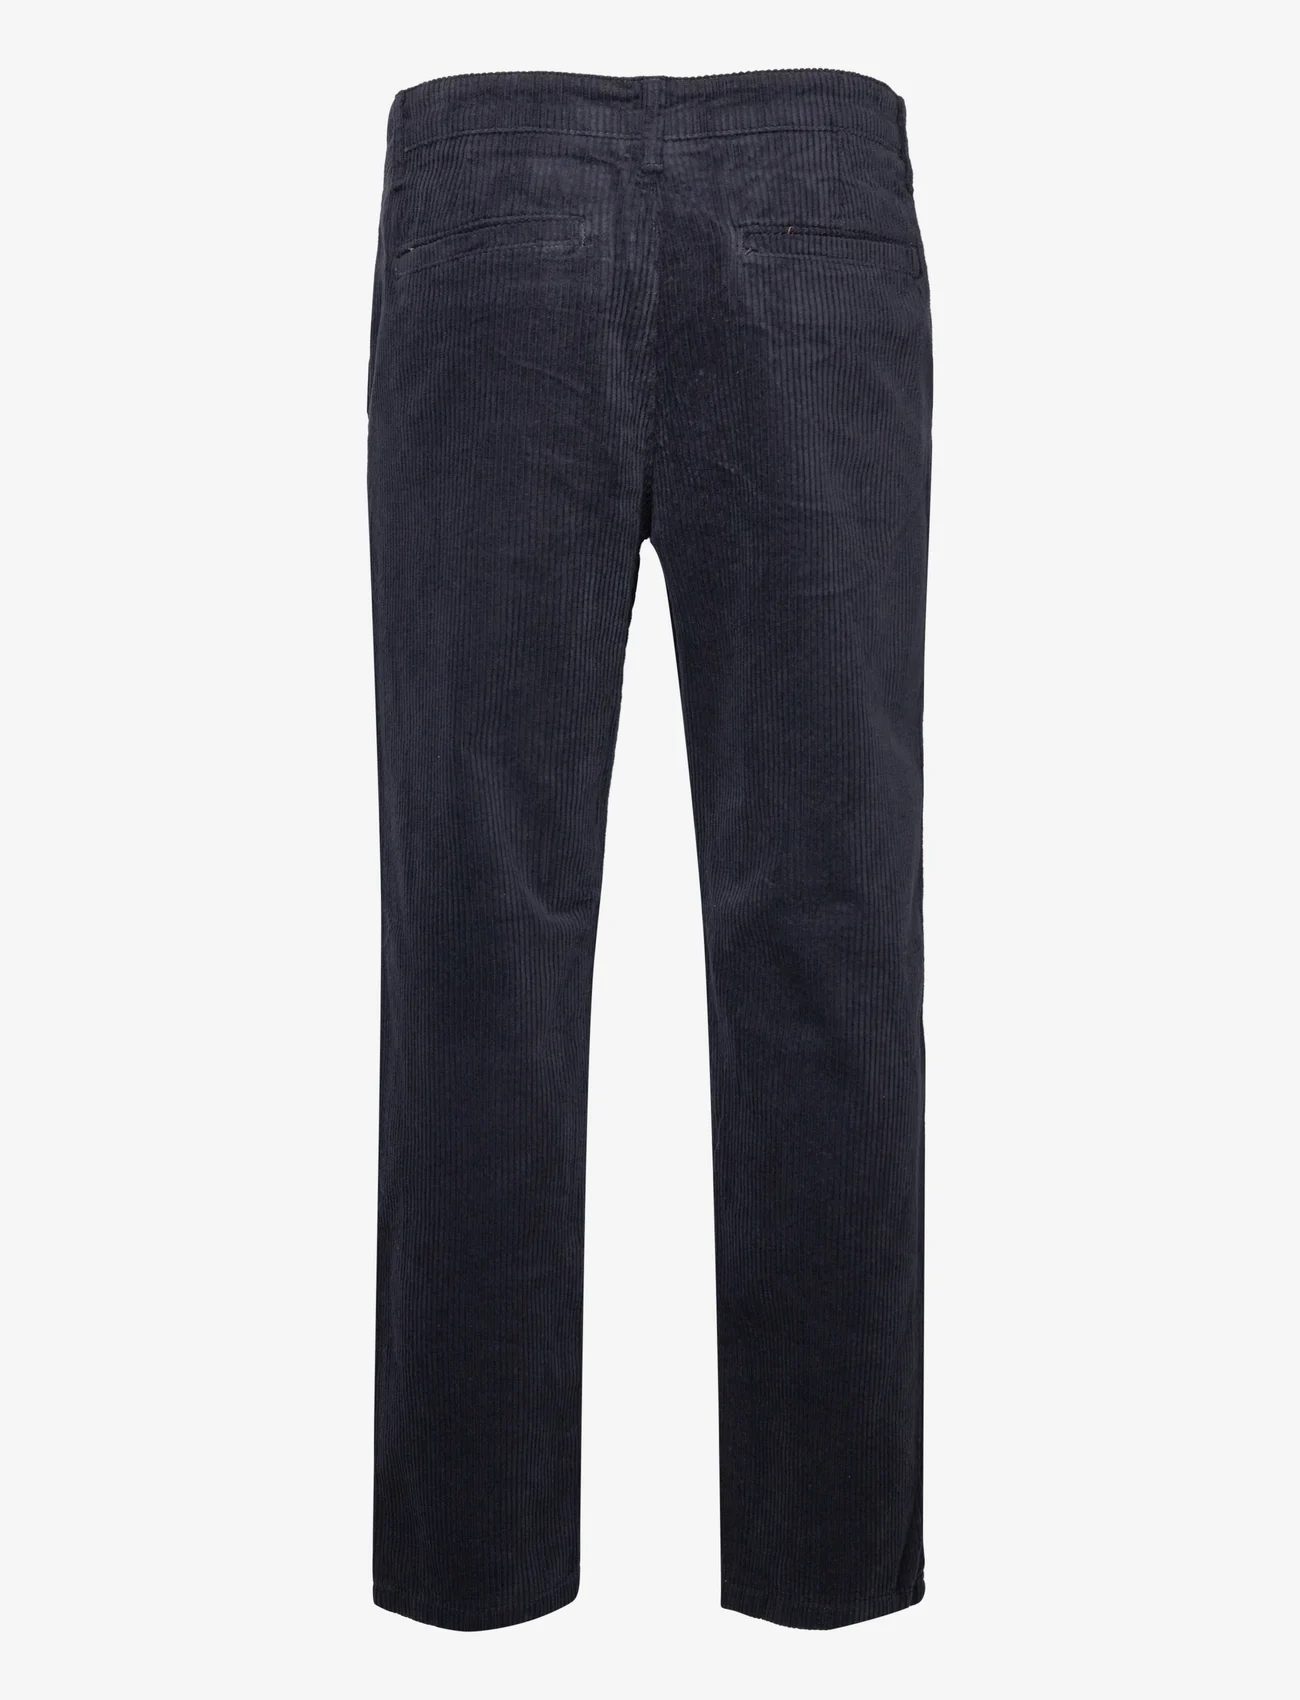 ONLY & SONS - ONSEDGE-ED LIFE LOOSE CORDUROY 3473 PANT - chinos - dark navy - 1